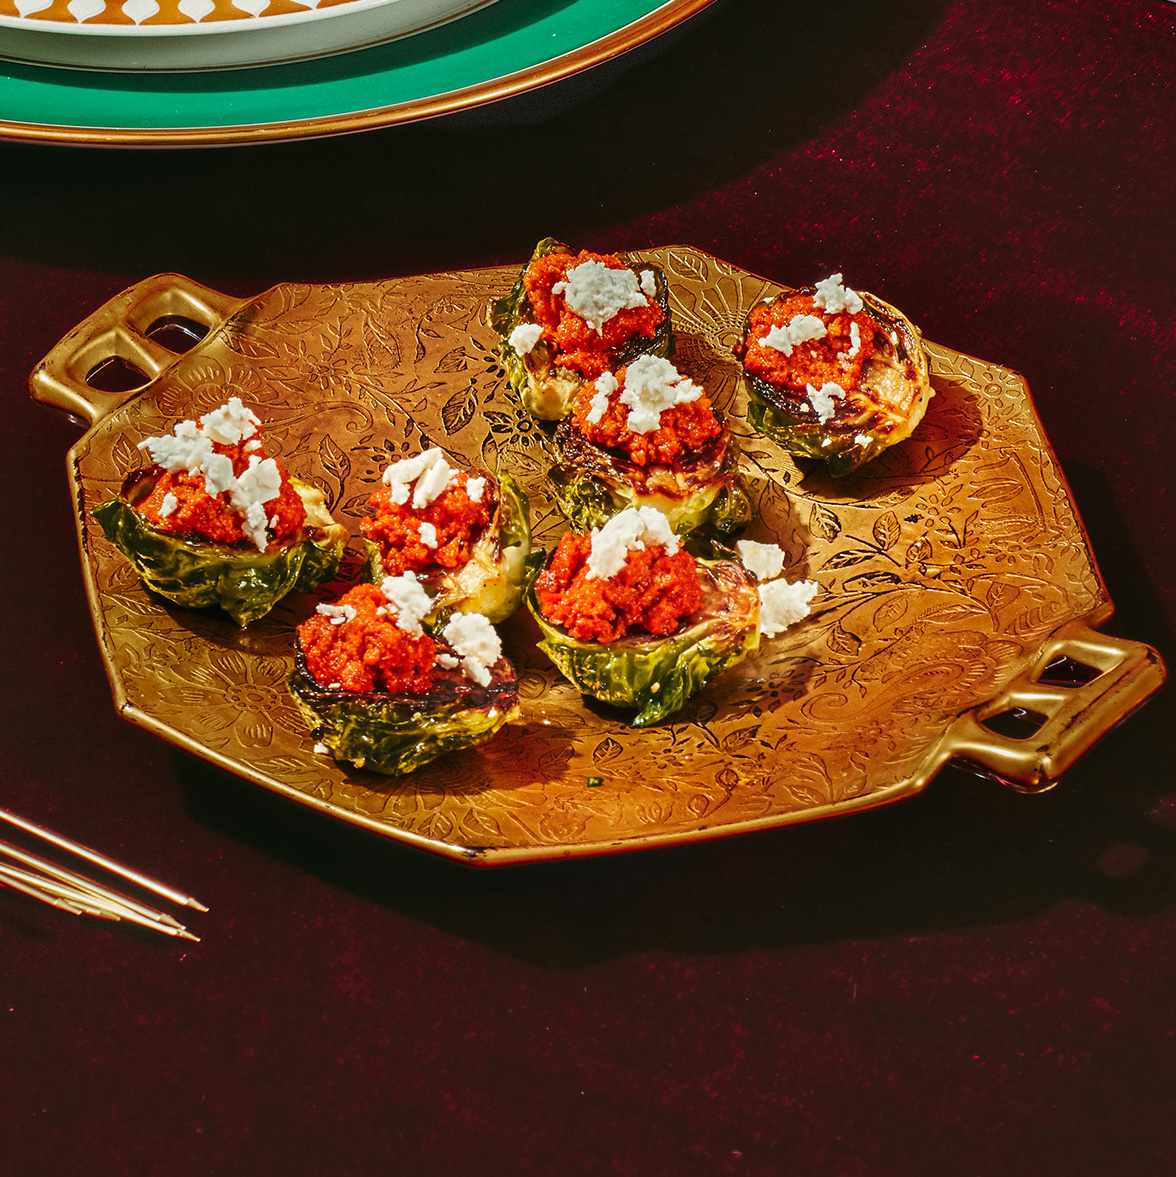 Romesco-Stuffed Brussels Sprout Bites